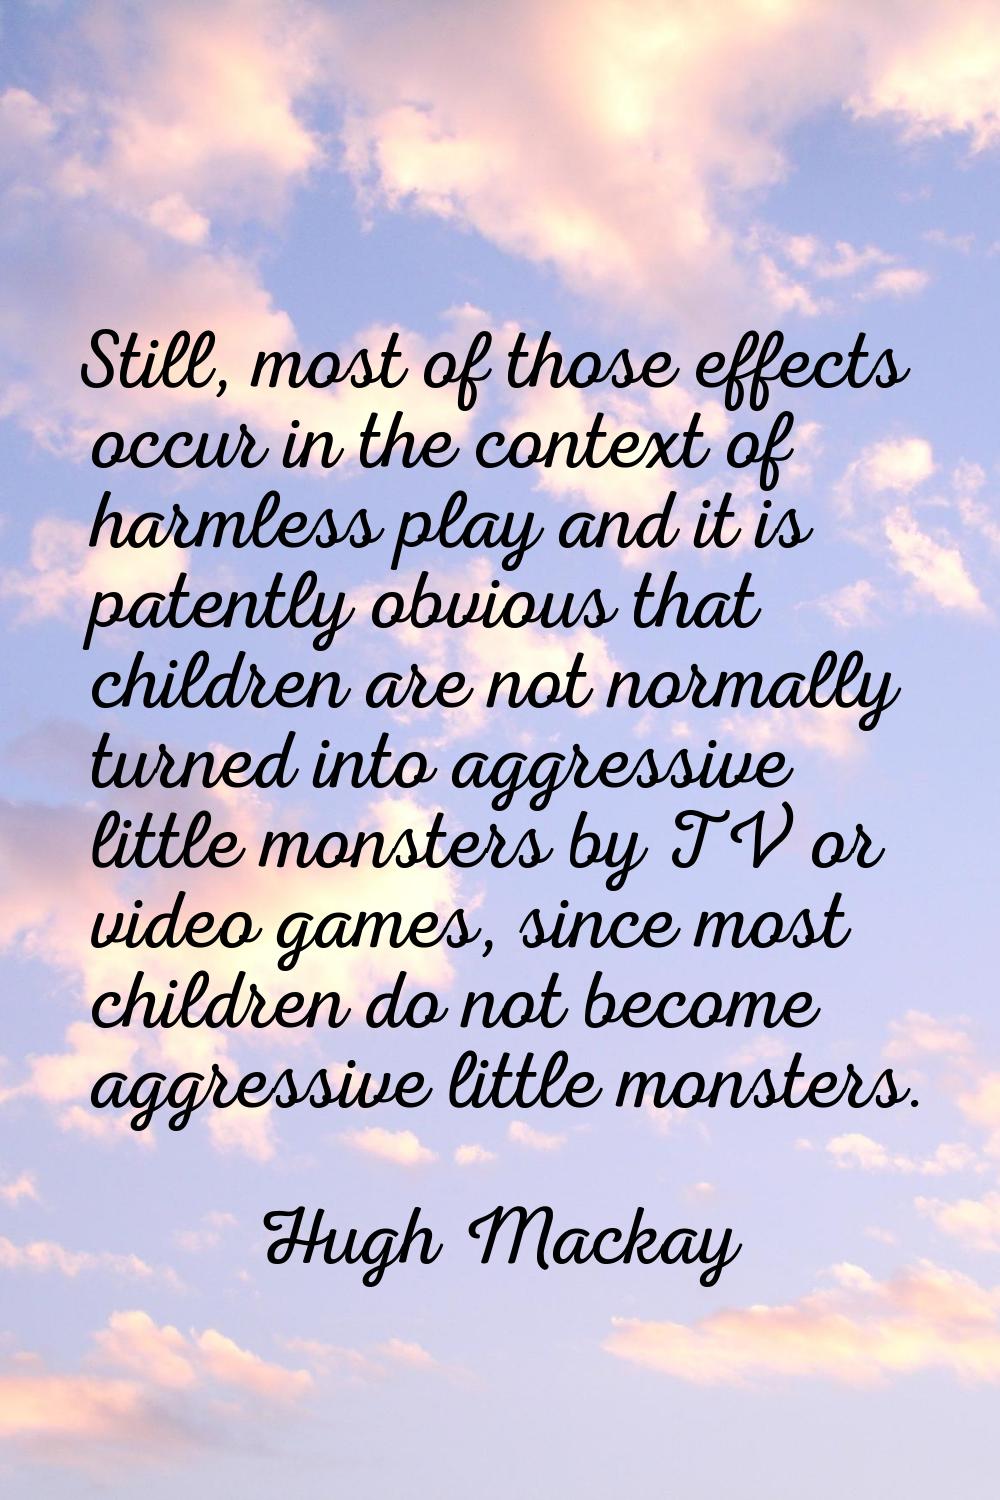 Still, most of those effects occur in the context of harmless play and it is patently obvious that 